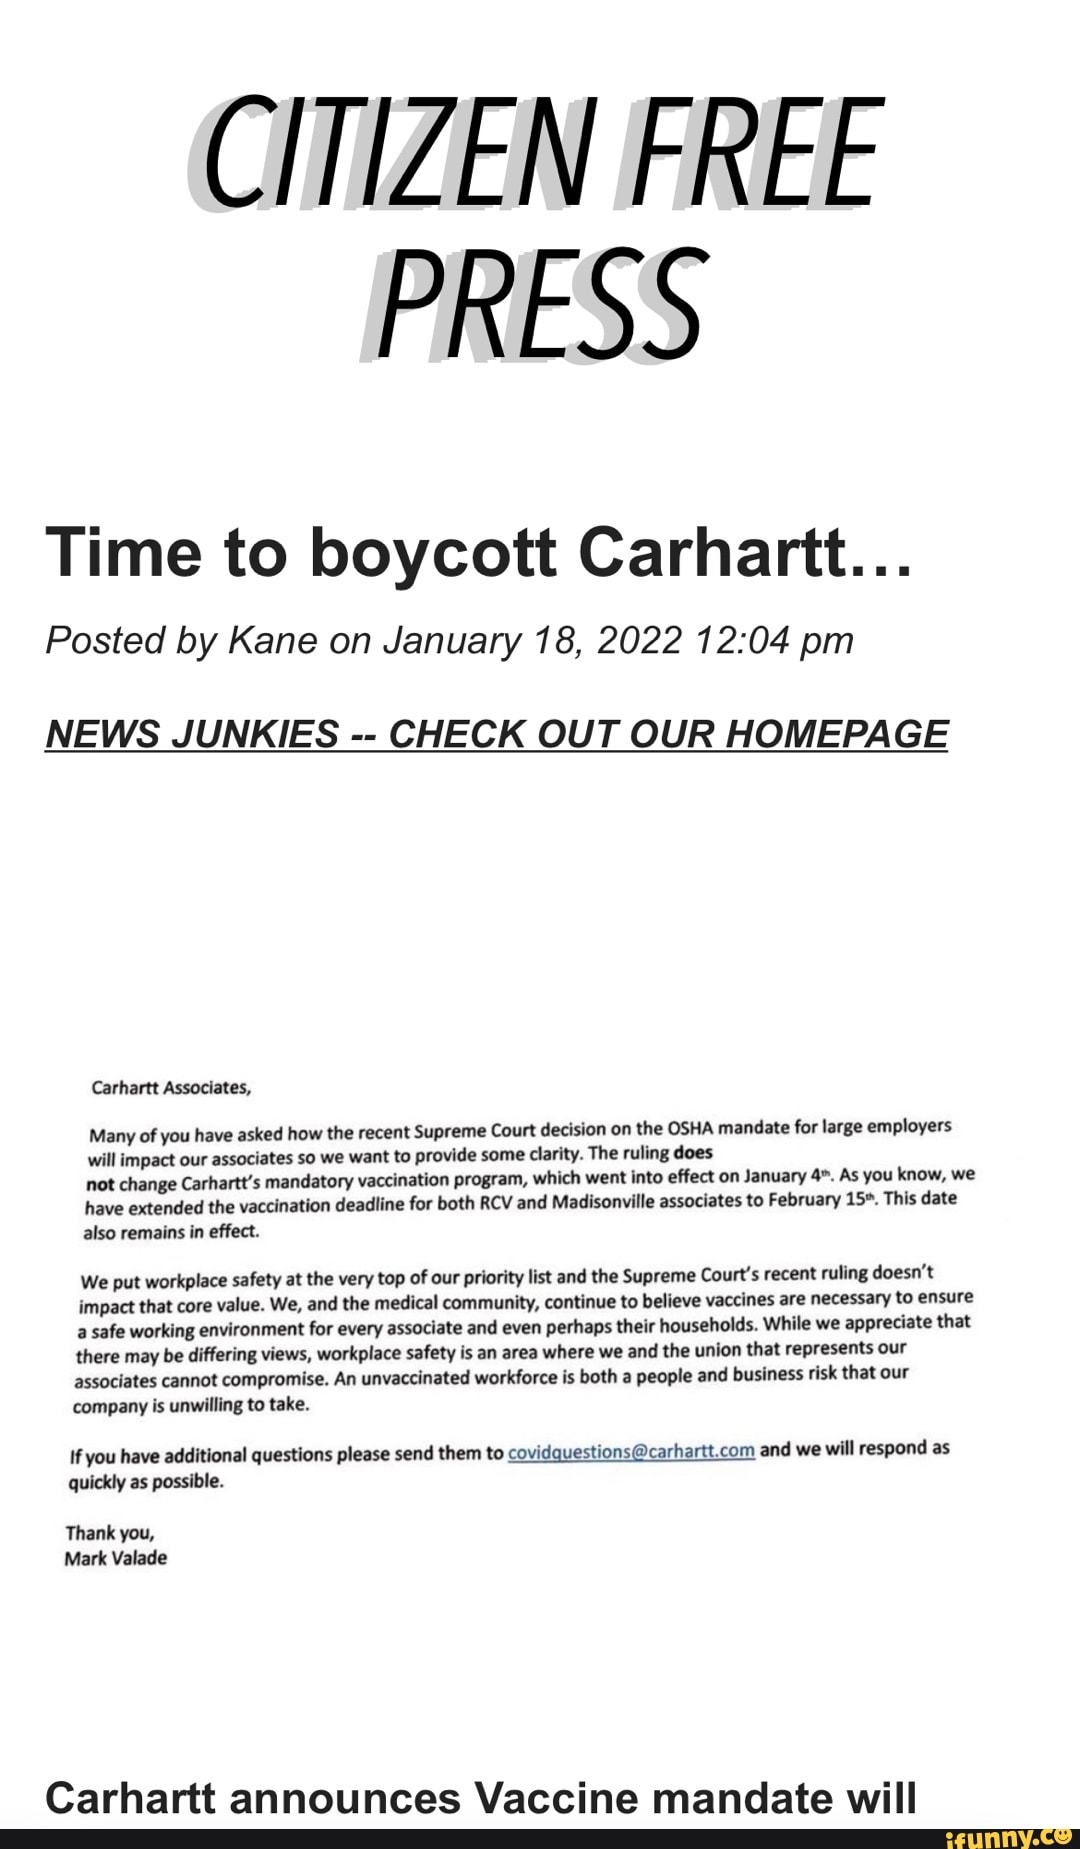 CITIZEN FREE PRESS Time to boycott Carhartt... Posted by Kane on January  18, 2022 pm NEWS